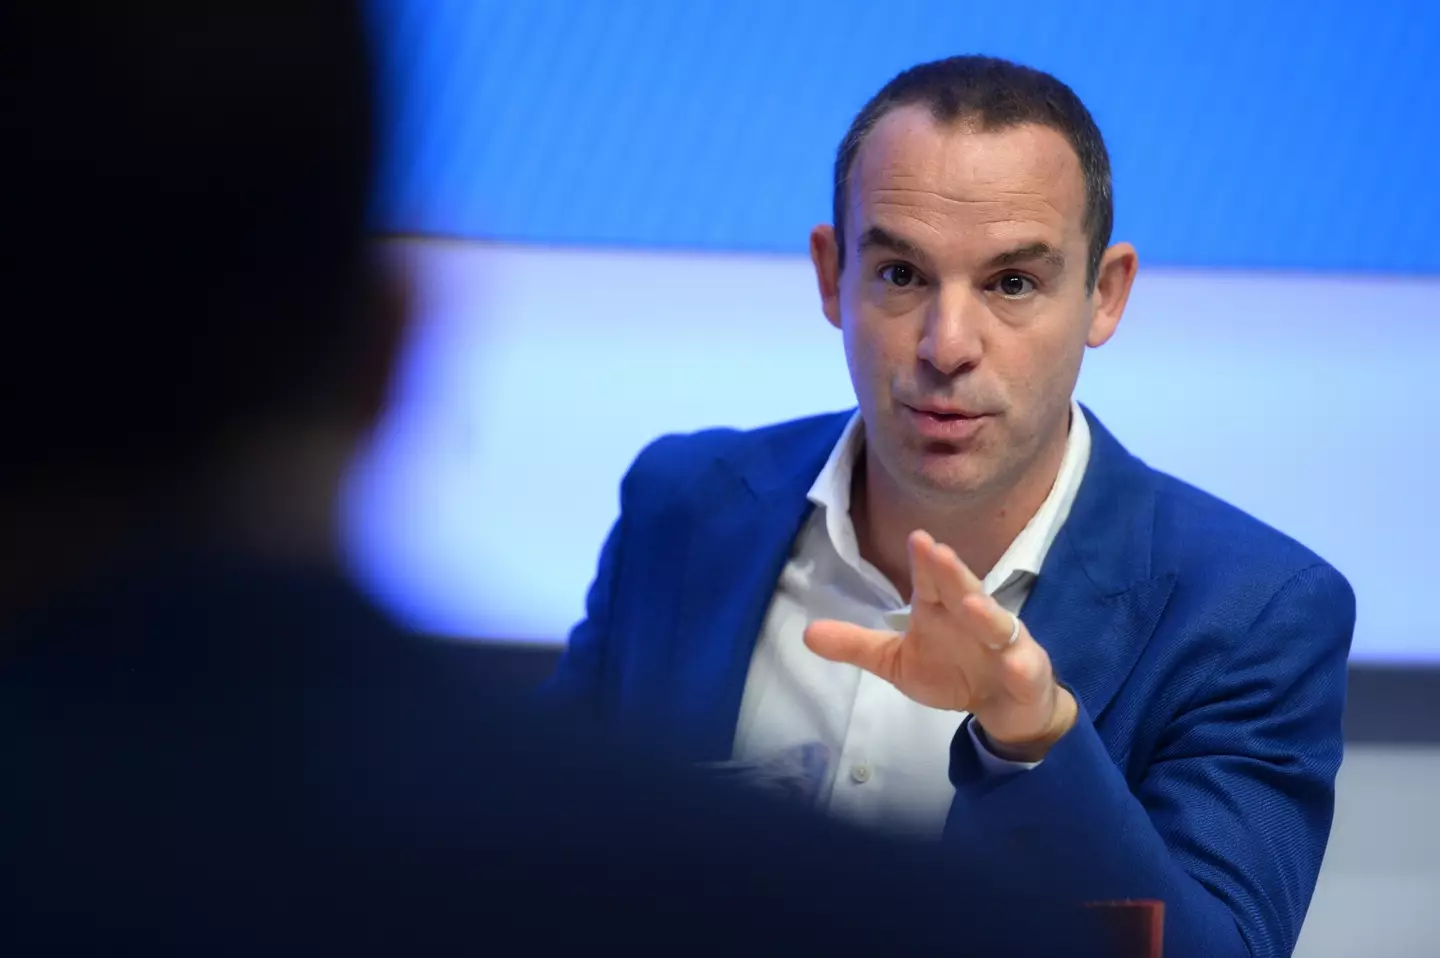 Martin Lewis' team have issued a warning for students.